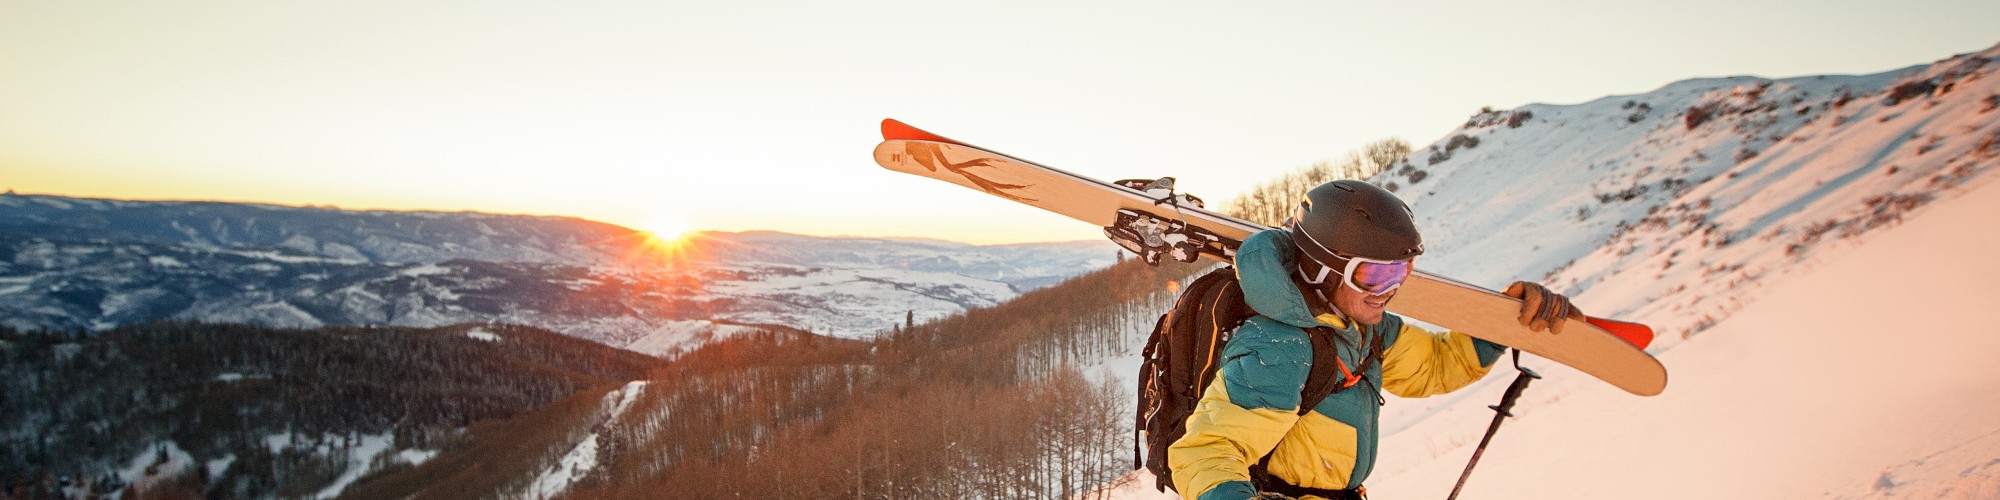 A skier carries skis up a snowy mountain slope at sunrise, with scenic forested hills and clear skies in the background.